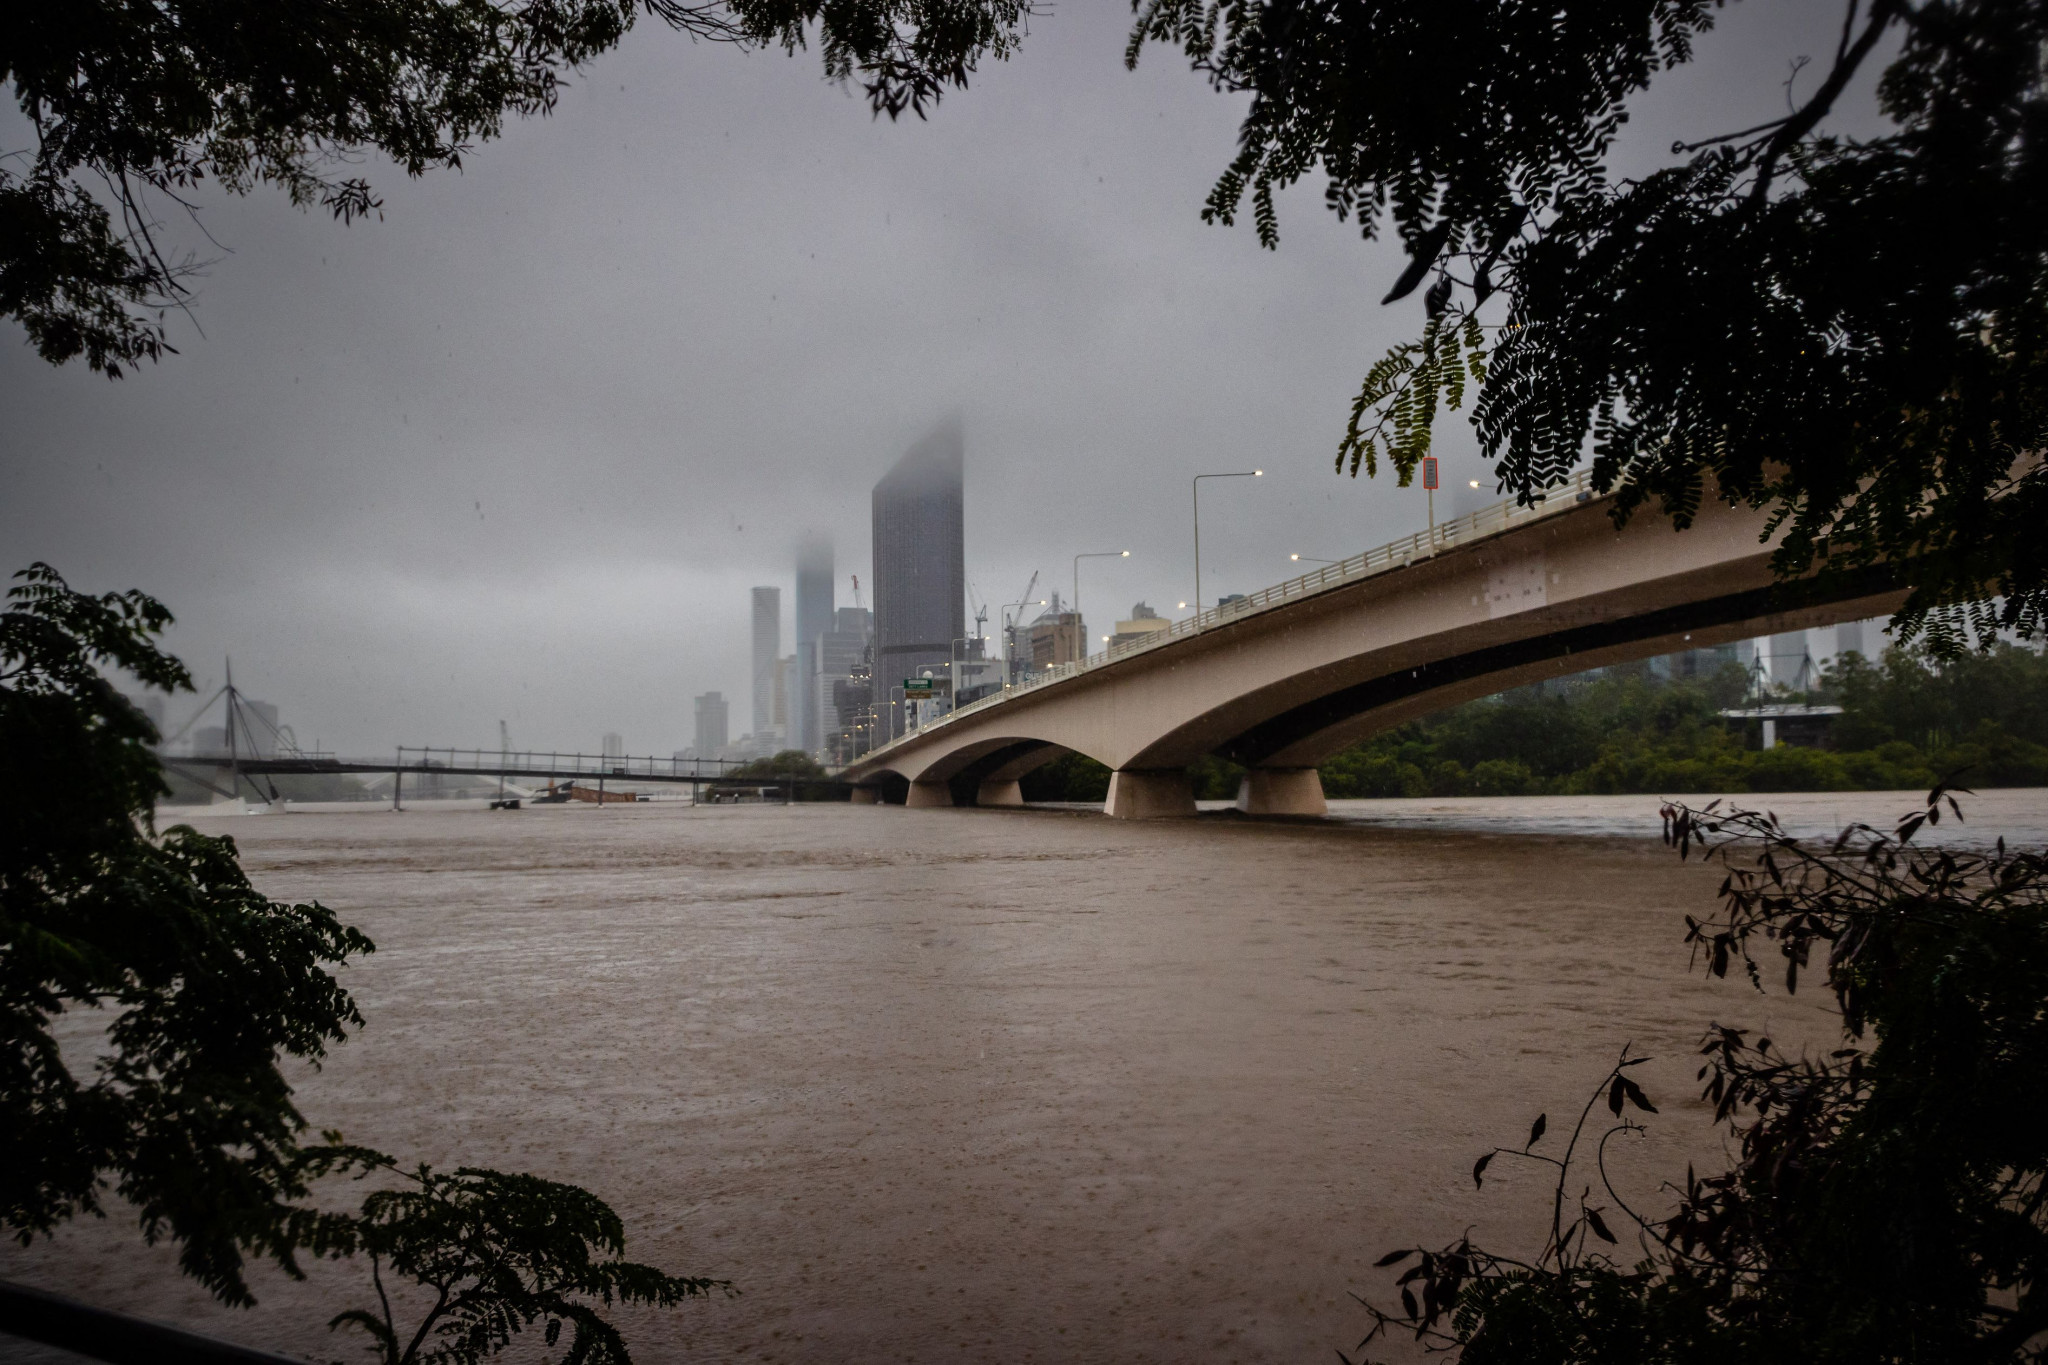 Clearing silt from the Brisbane River and preventing flooding erosion should be a "green legacy" of the Brisbane 2032 Games, organisers have been told by a former Queensland Minister ©Getty Images